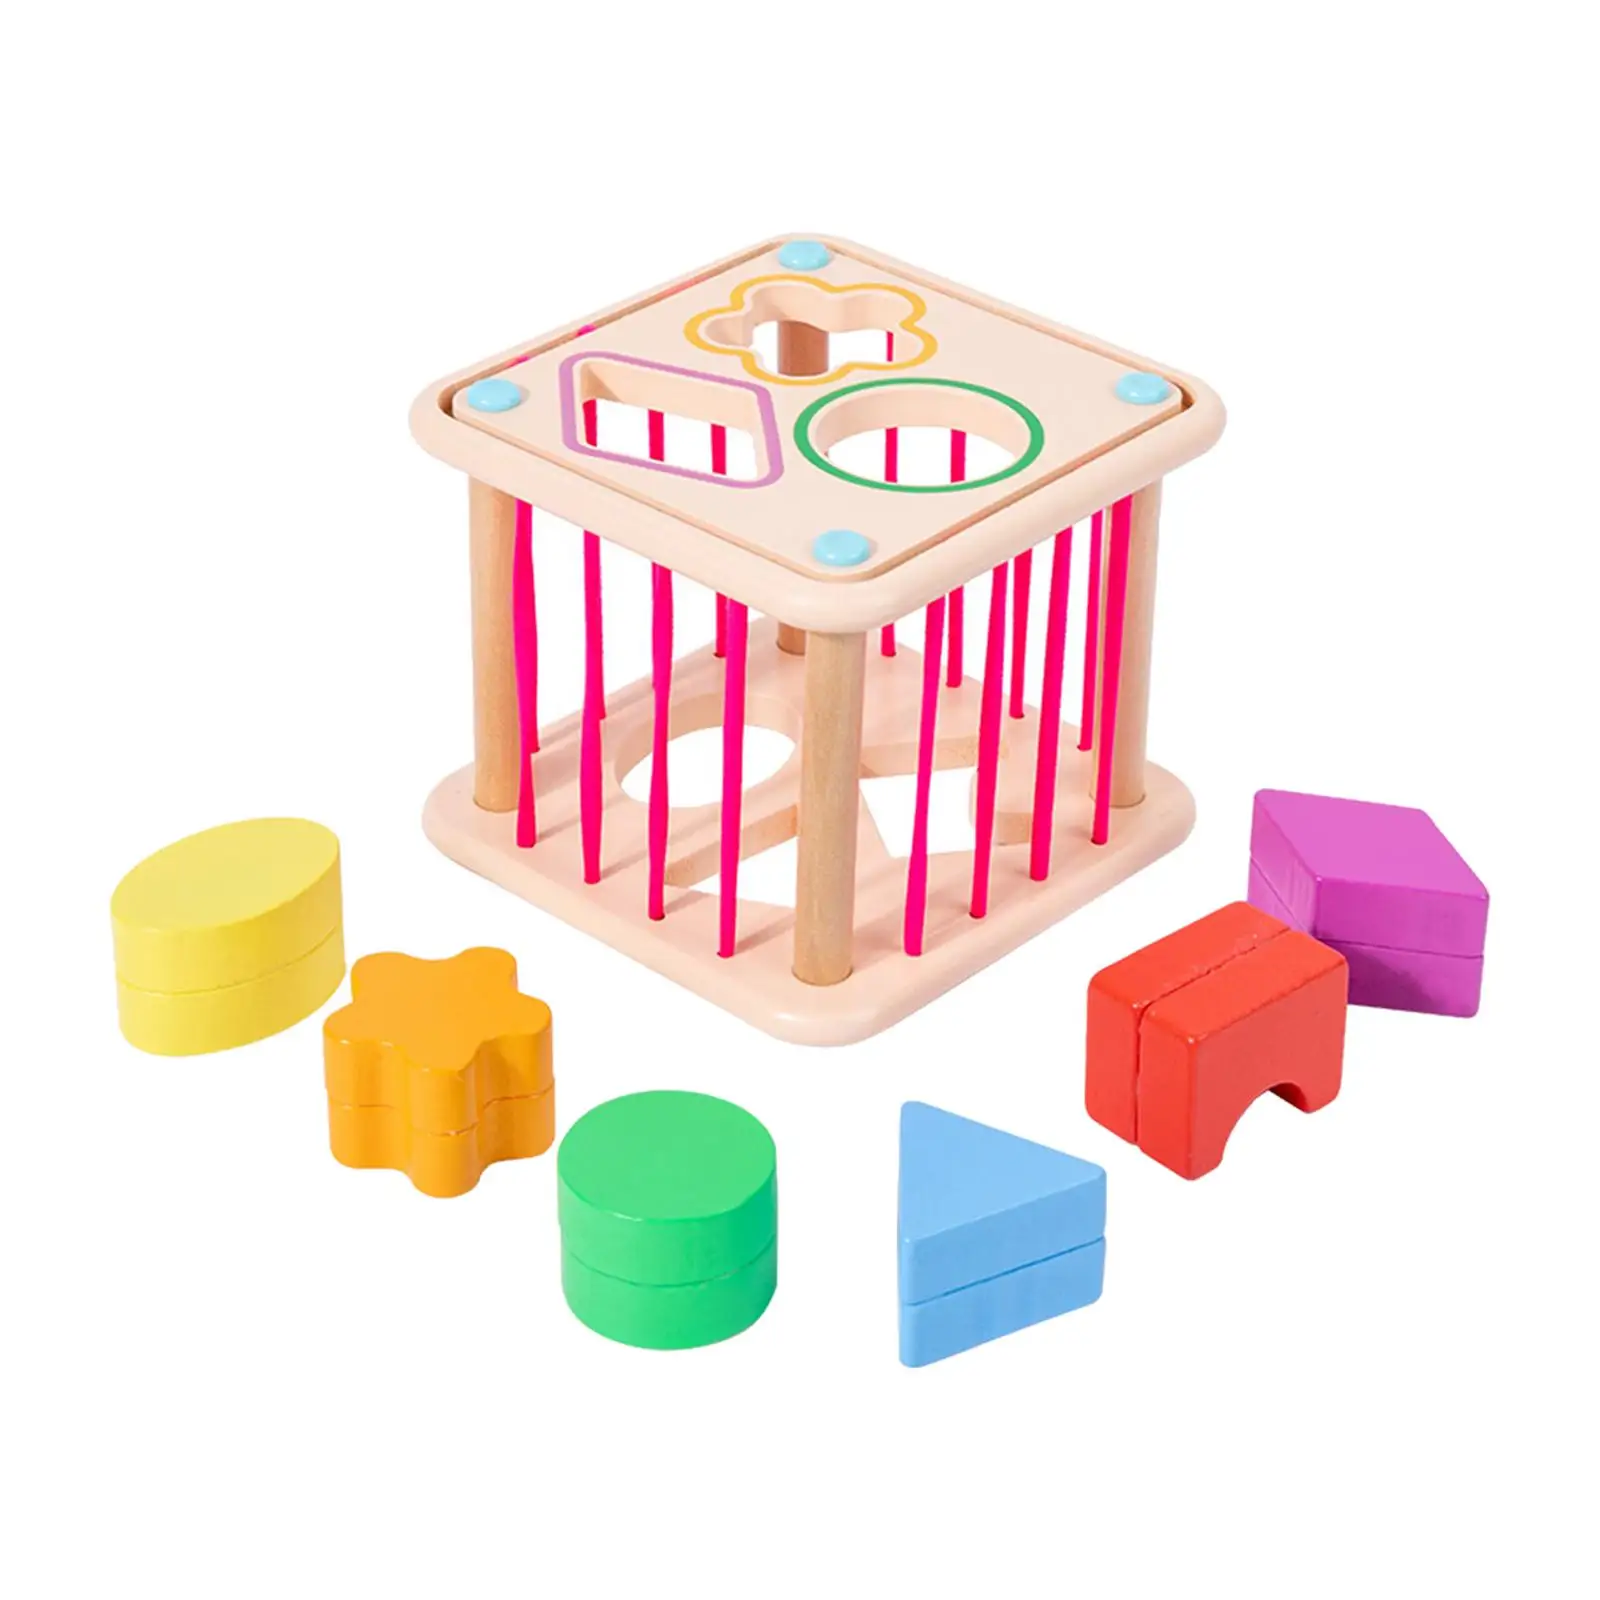 Sensory Bin Toys Shape Sorter Toy Matching ,Educational Wooden Color Recognition